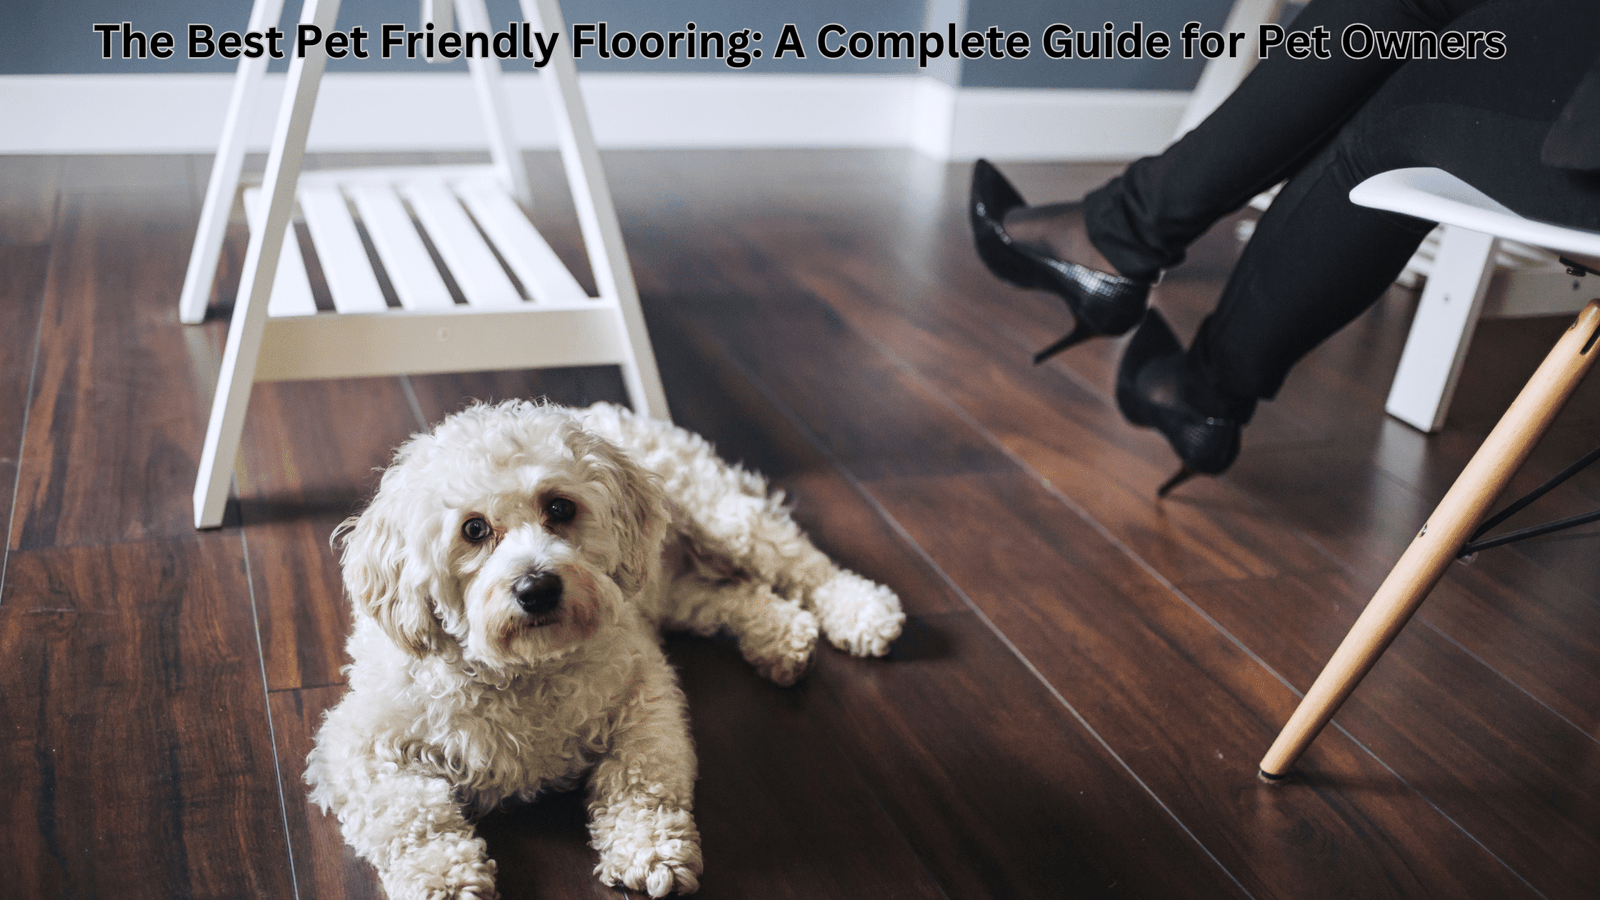 The Best Pet Friendly Flooring: A Complete Guide for Pet Owners